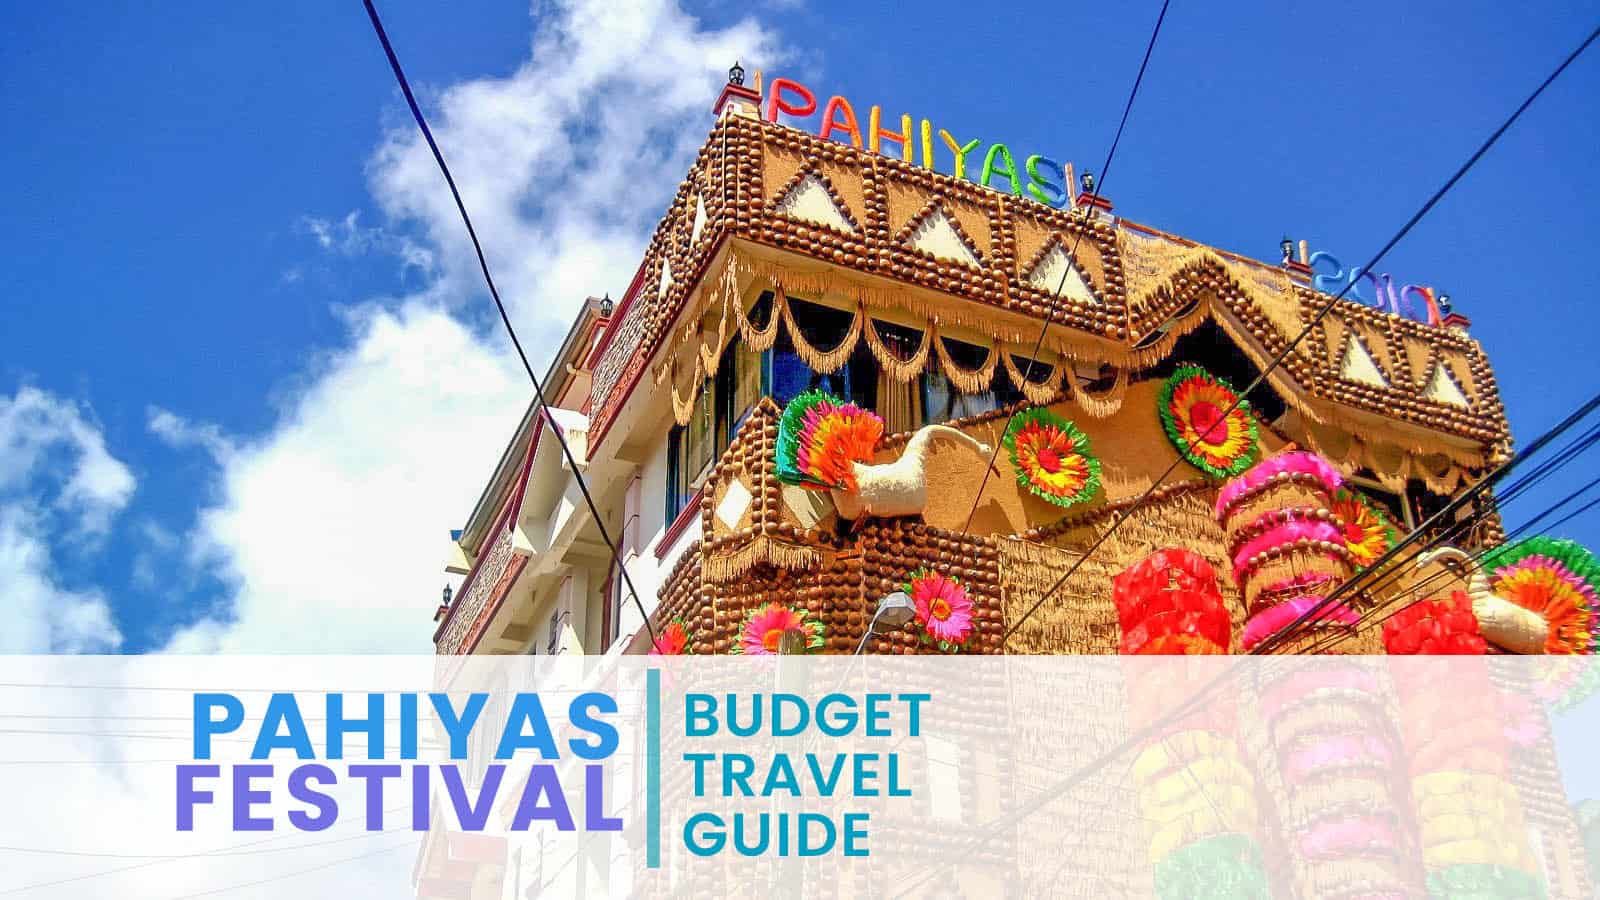 PAHIYAS FESTIVAL ON A BUDGET: Travel Guide & Itinerary